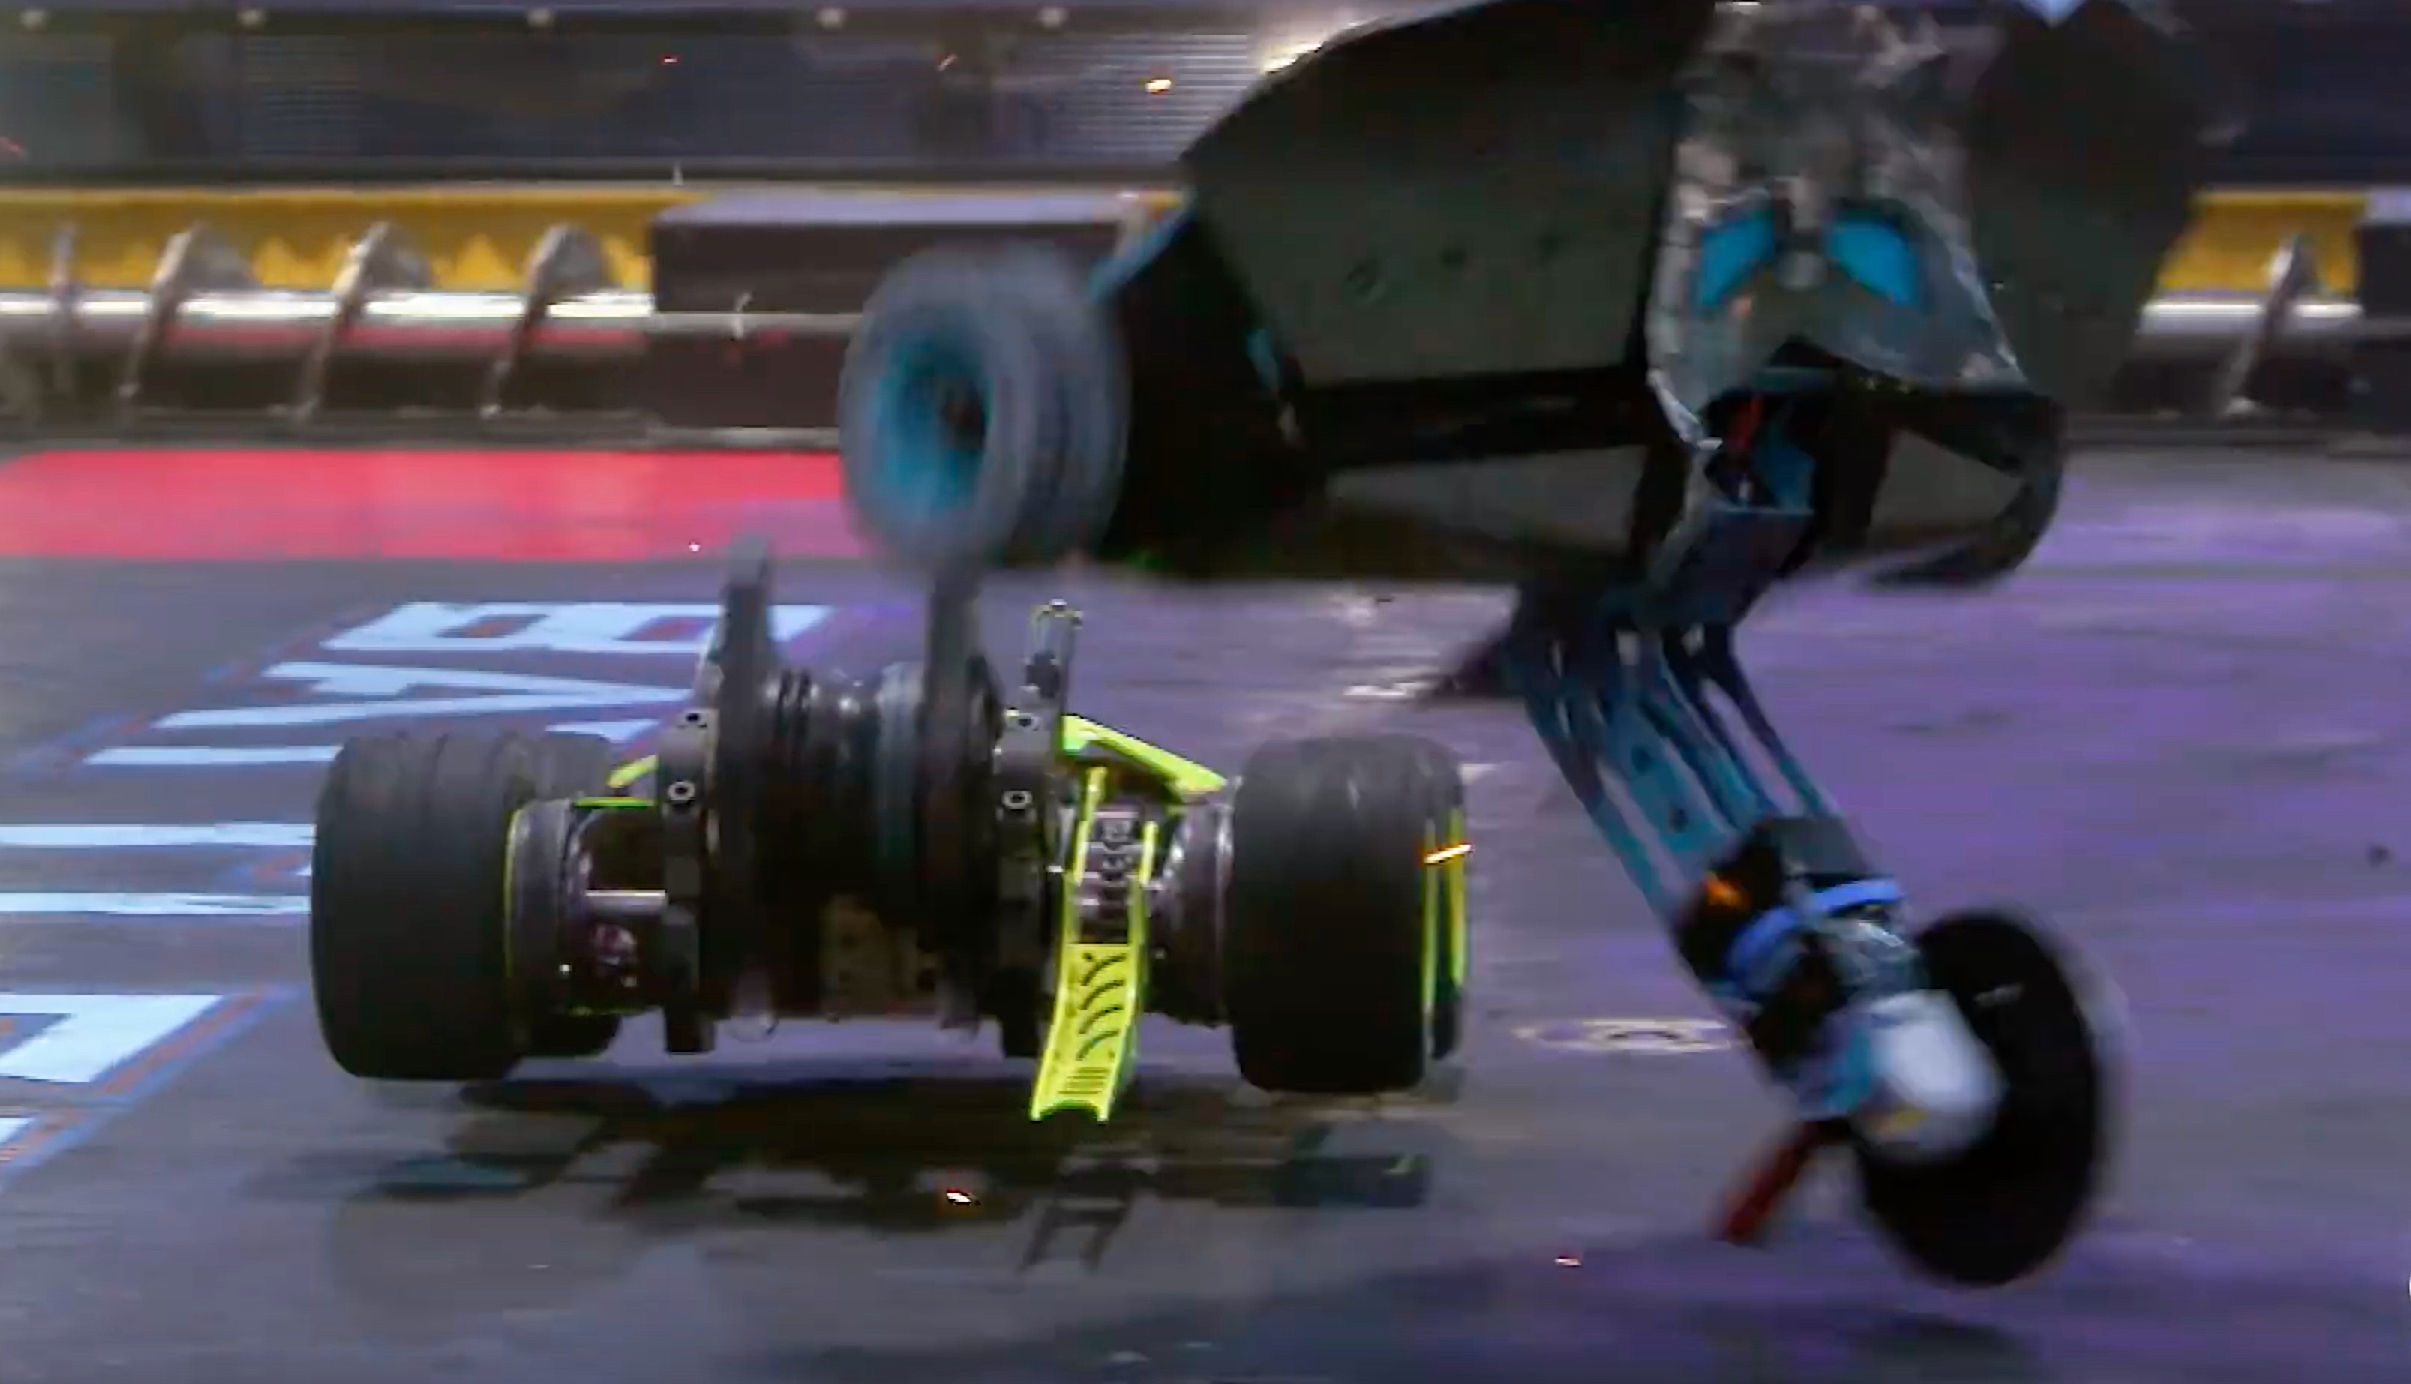 BattleBots fight it out on Discovery Channel